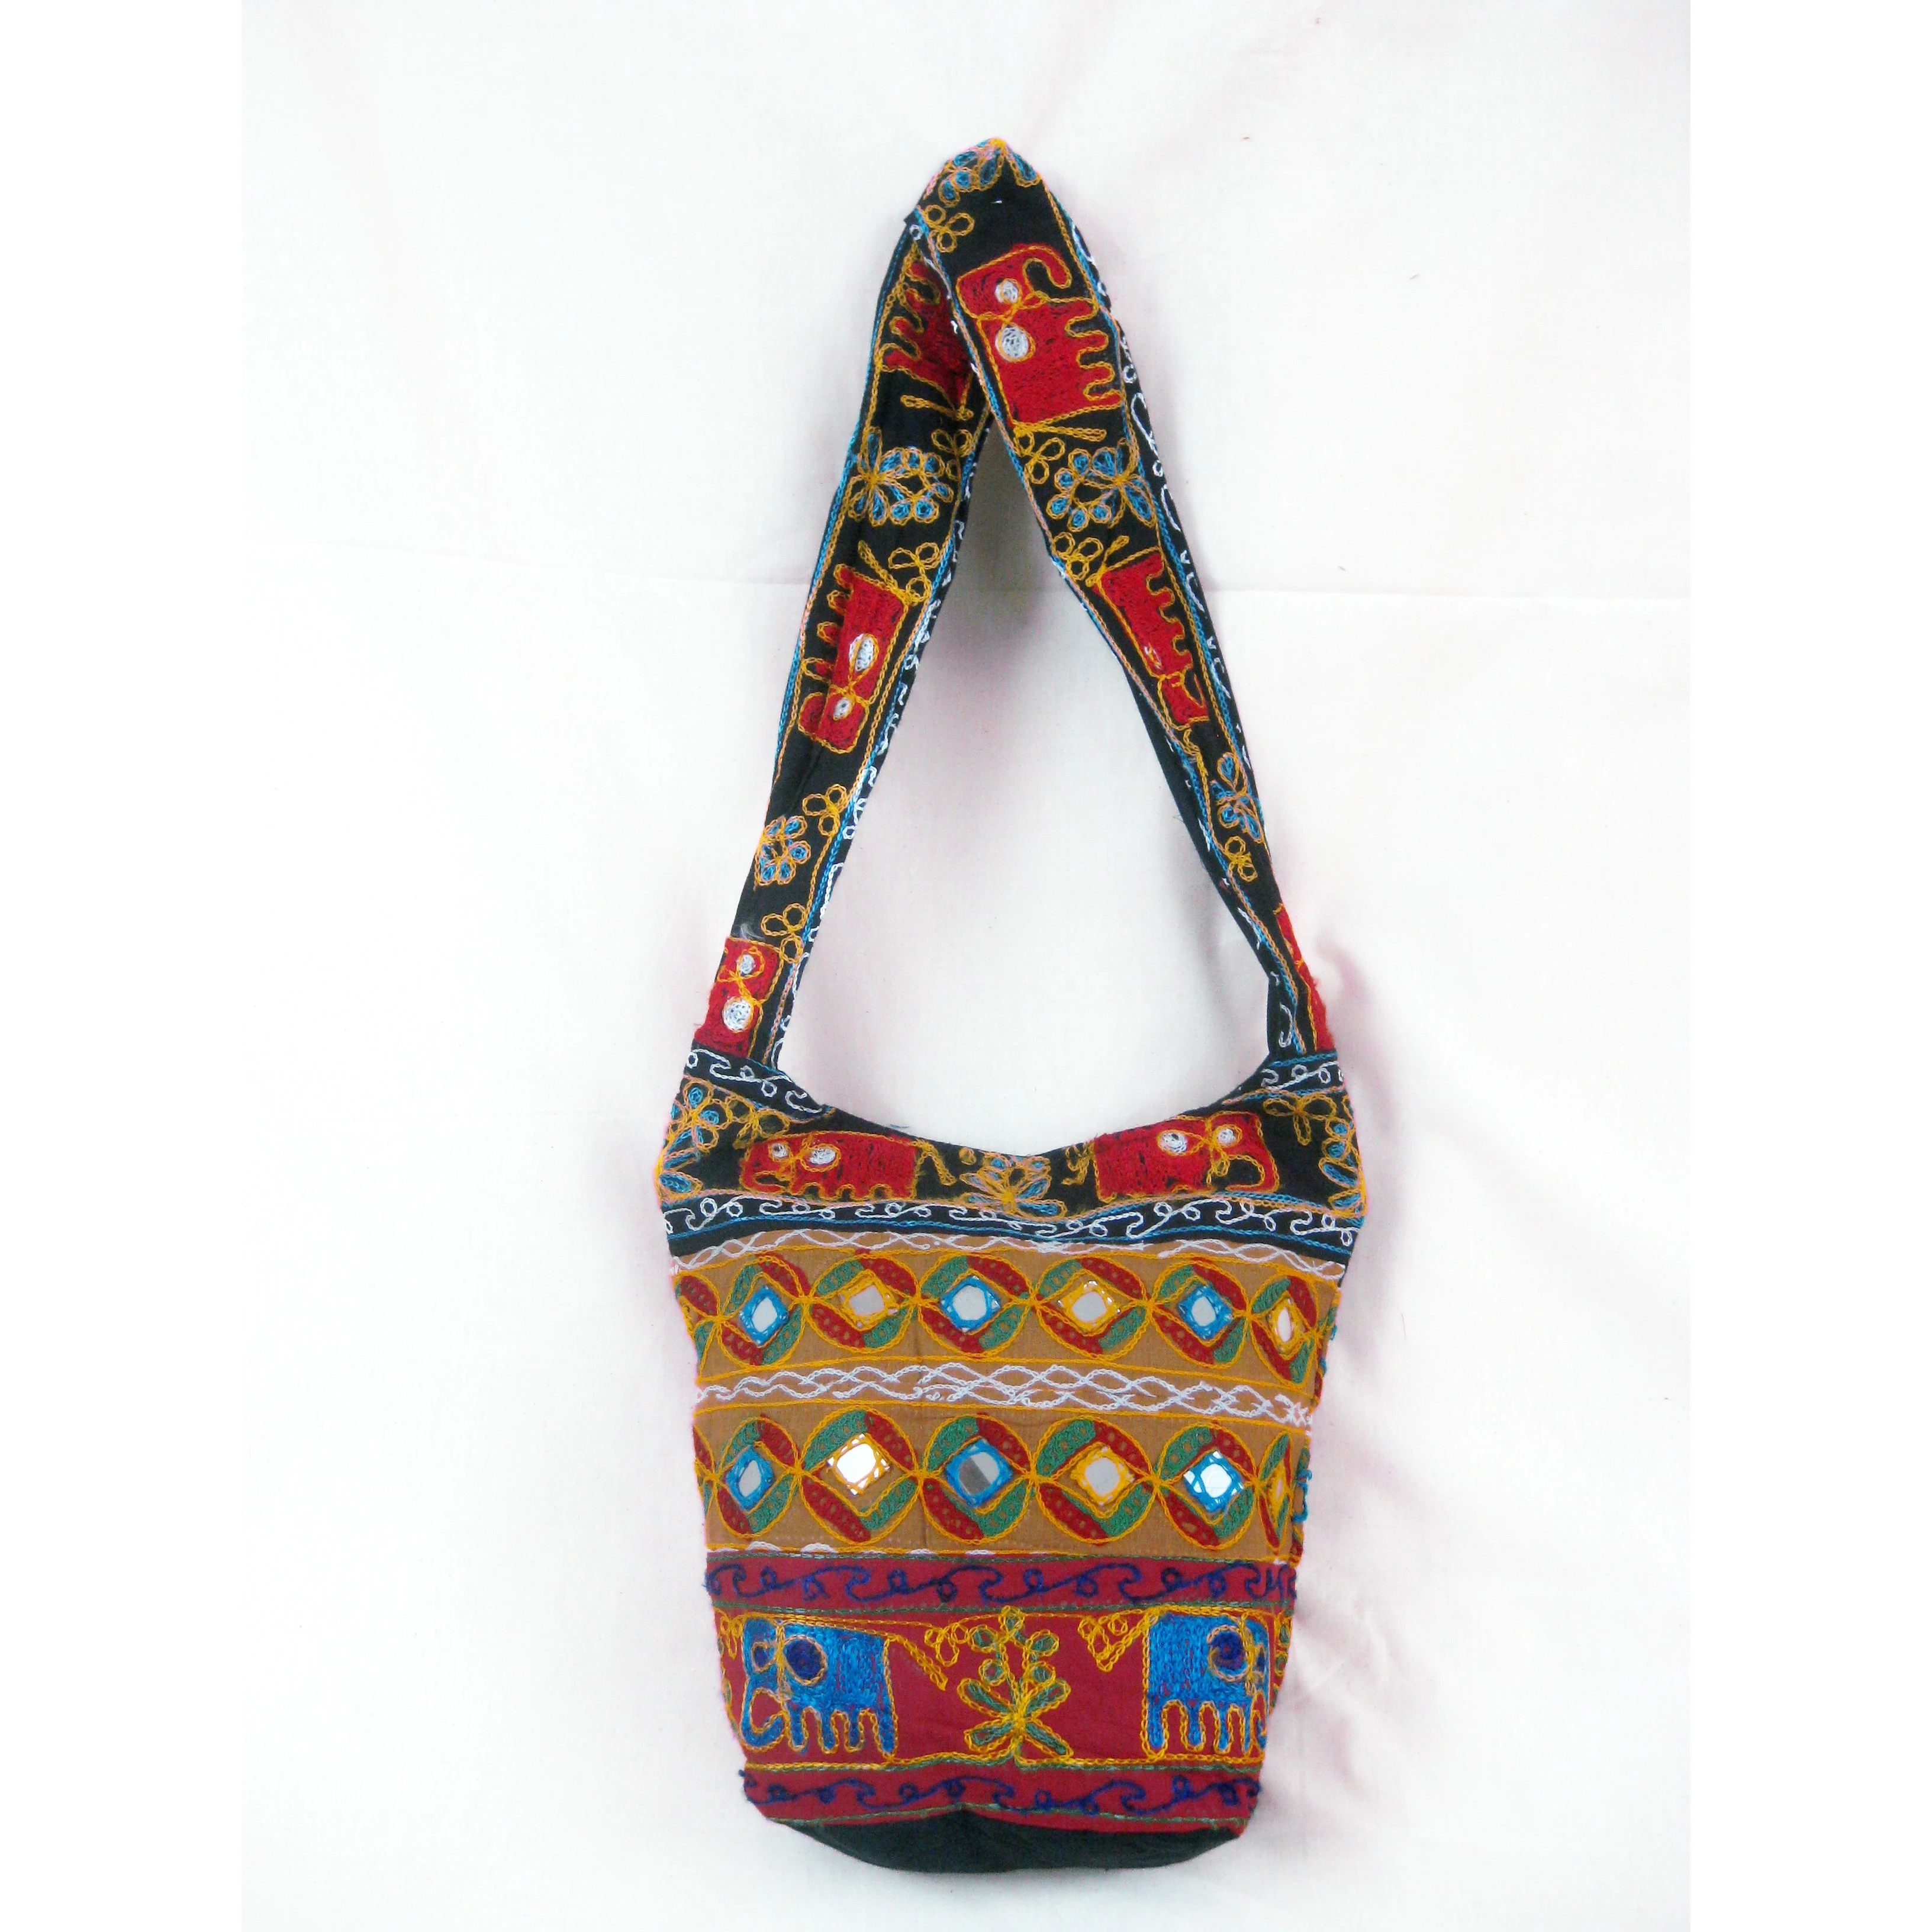 Sling Bags Or Jhola: Everything From A To Z | Utsavpedia